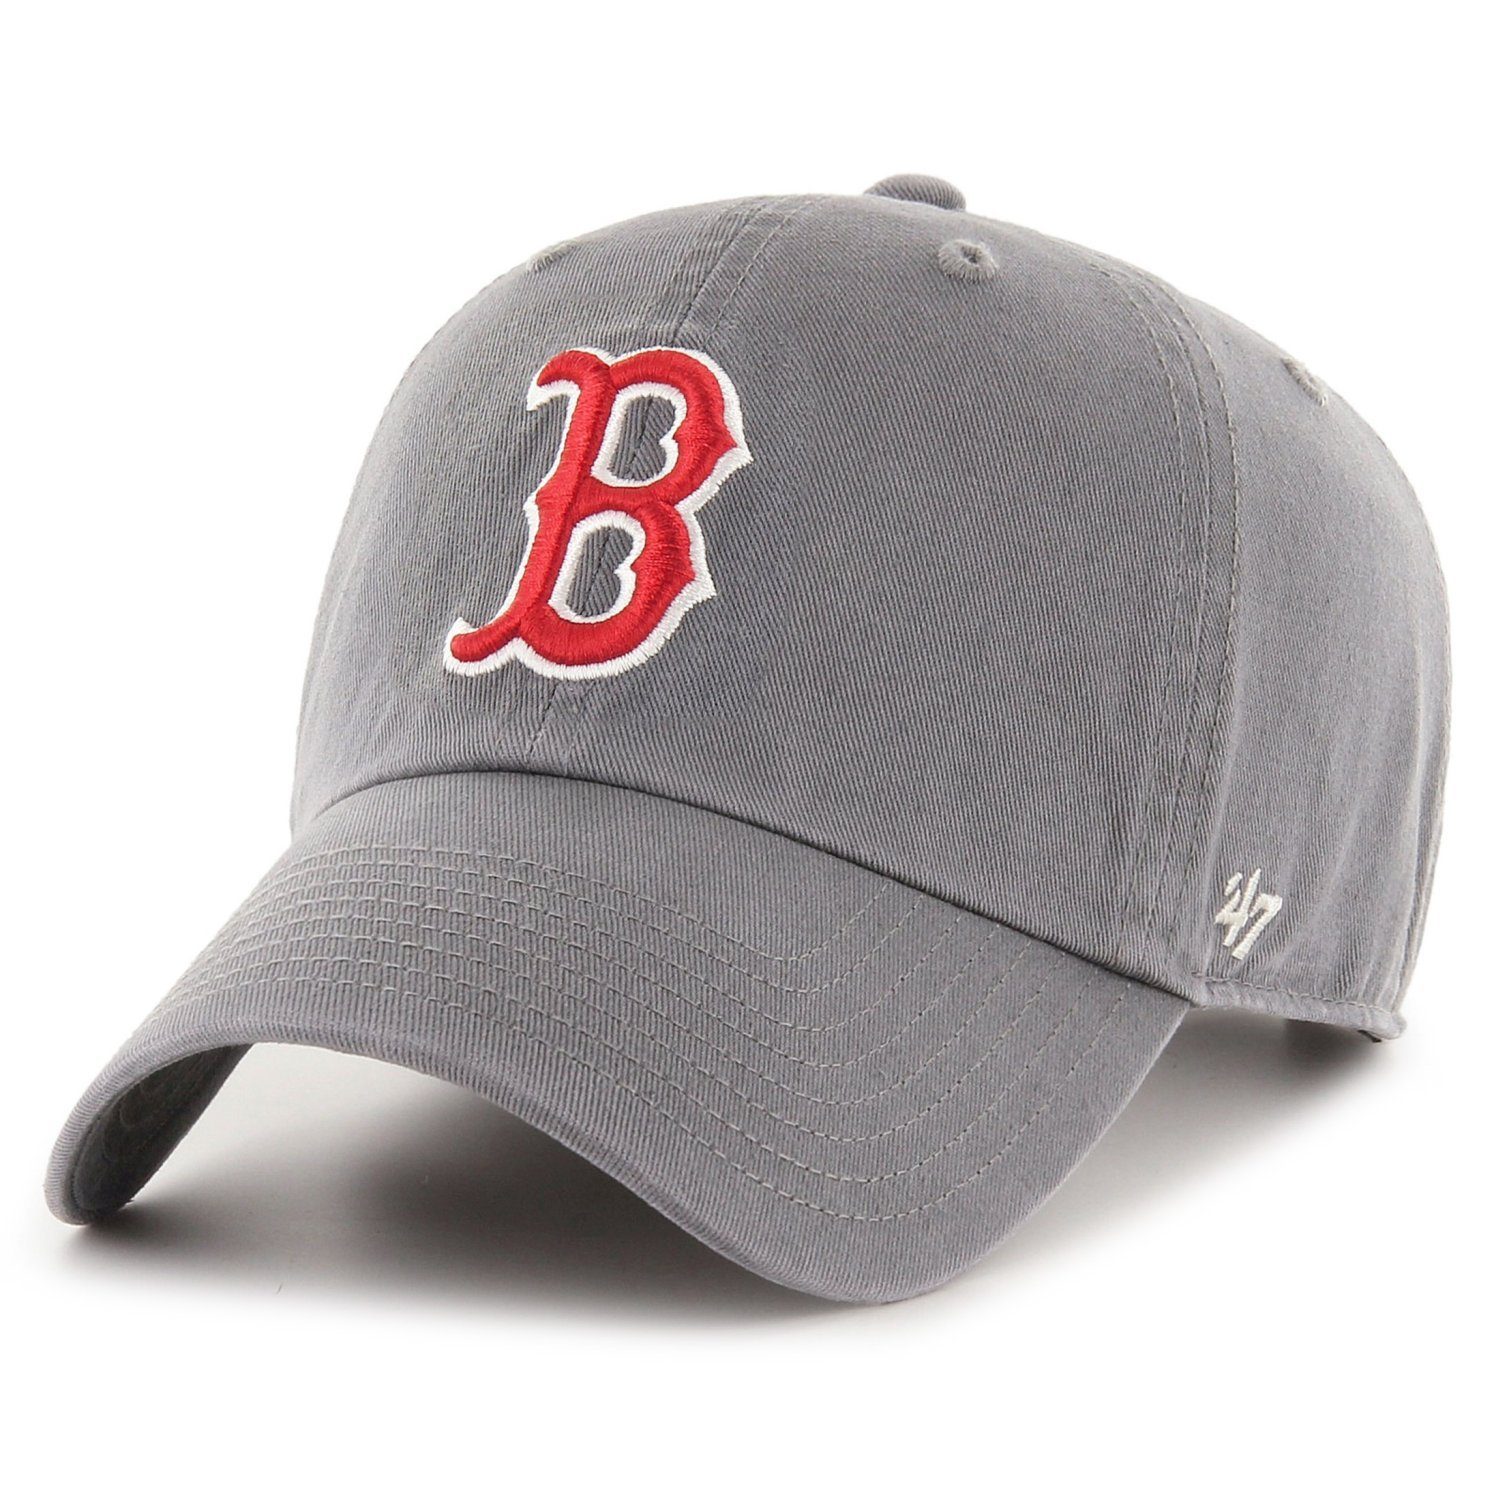 '47 Brand Trucker Cap Relaxed Fit MLB CLEAN UP Boston Red Sox